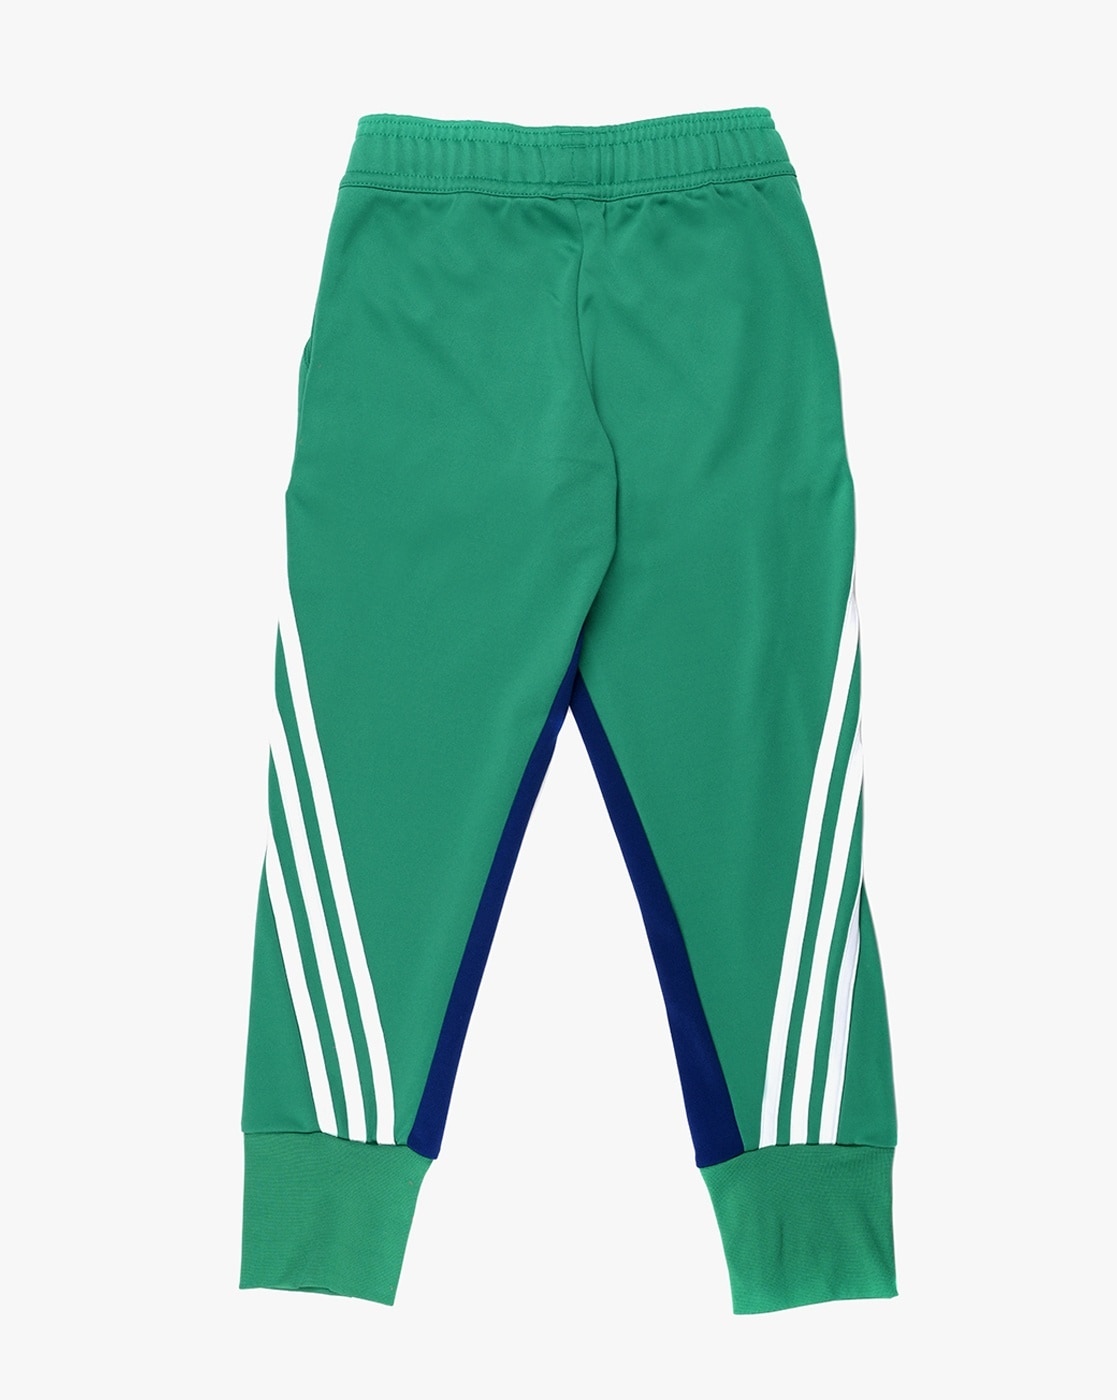 Buy adidas Boy's Track Jacket and Pants, Black/Blue at Amazon.in